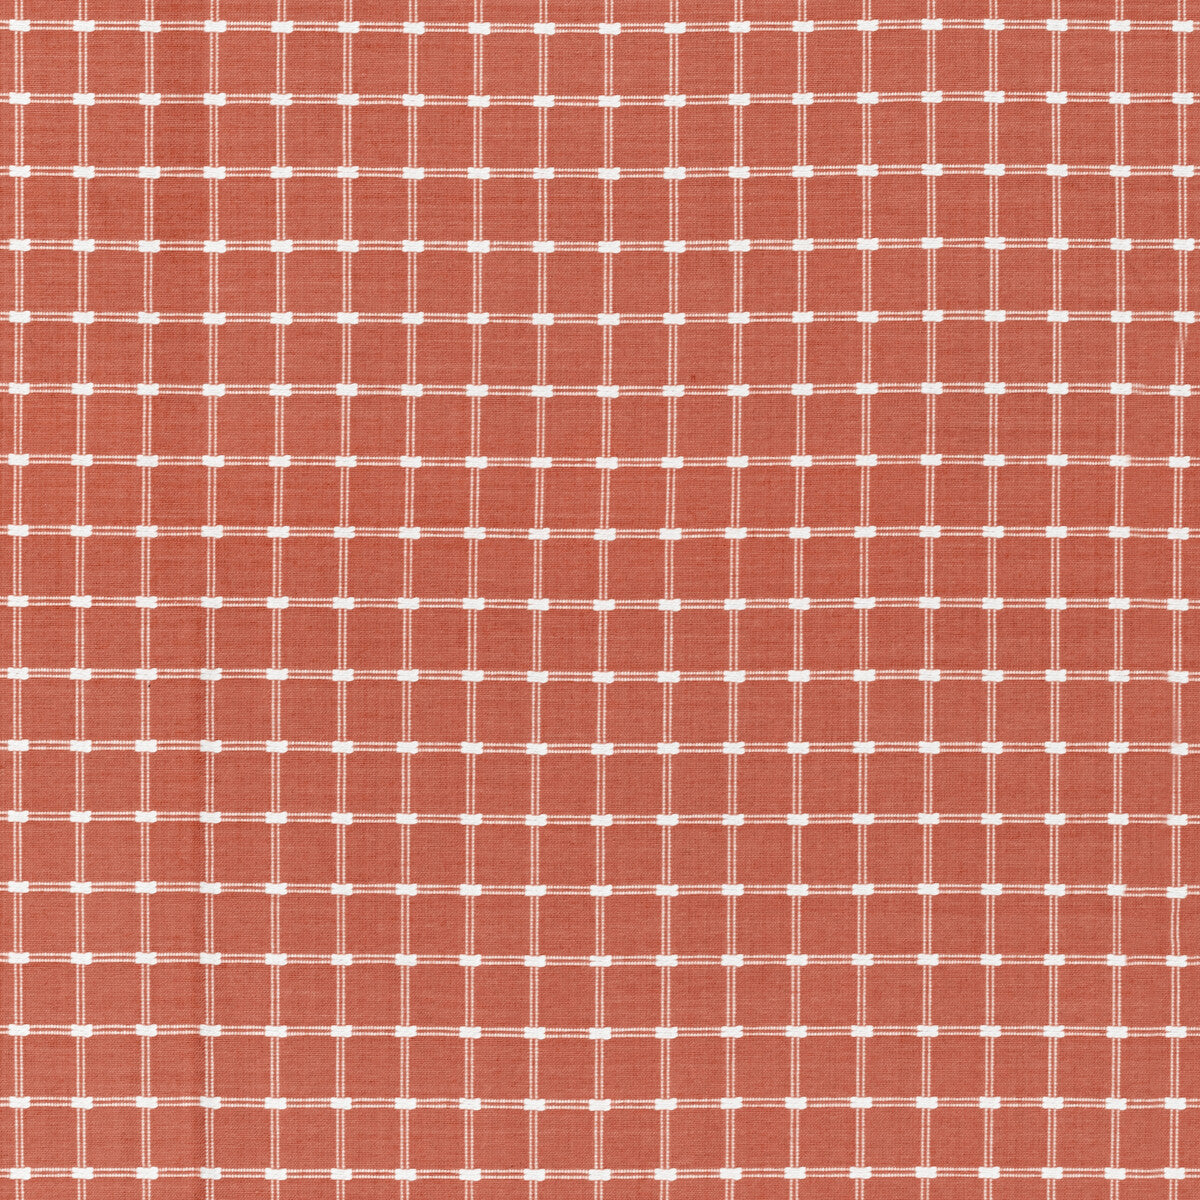 Lison Check fabric in melon color - pattern 8022116.12.0 - by Brunschwig &amp; Fils in the Normant Checks And Stripes II collection